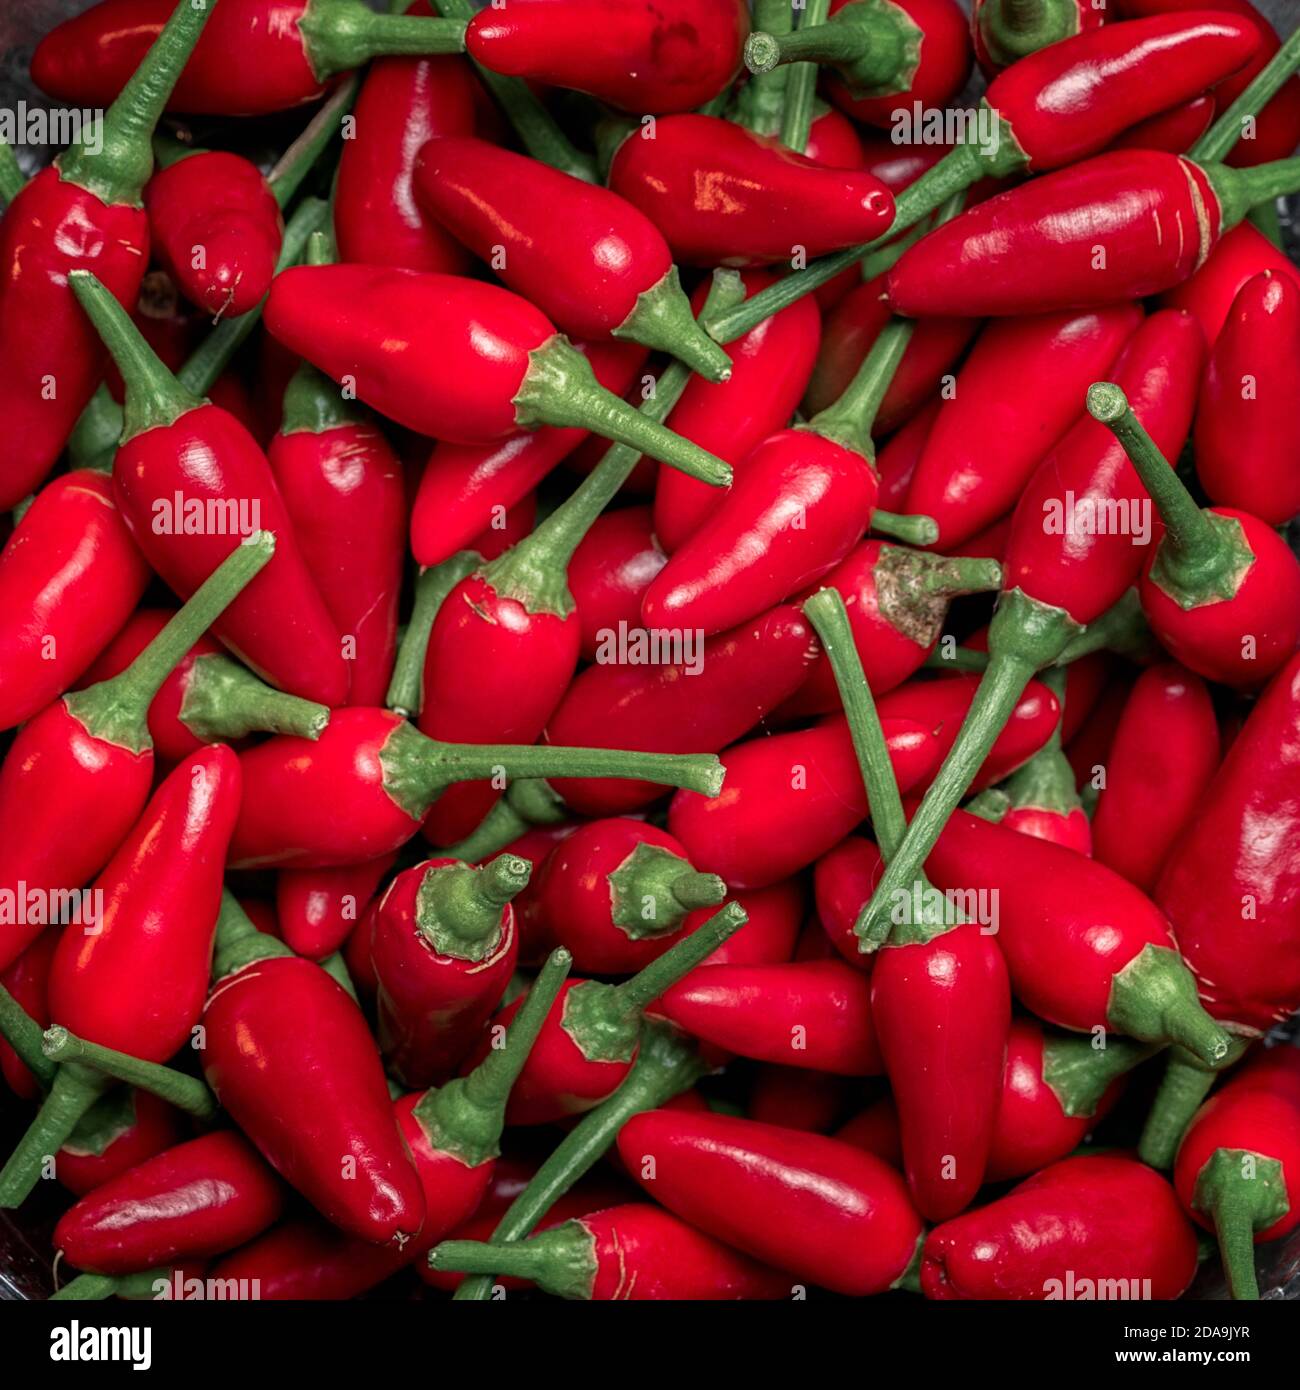 Red hot chilli peppers pattern texture background, square composition. Stock Photo